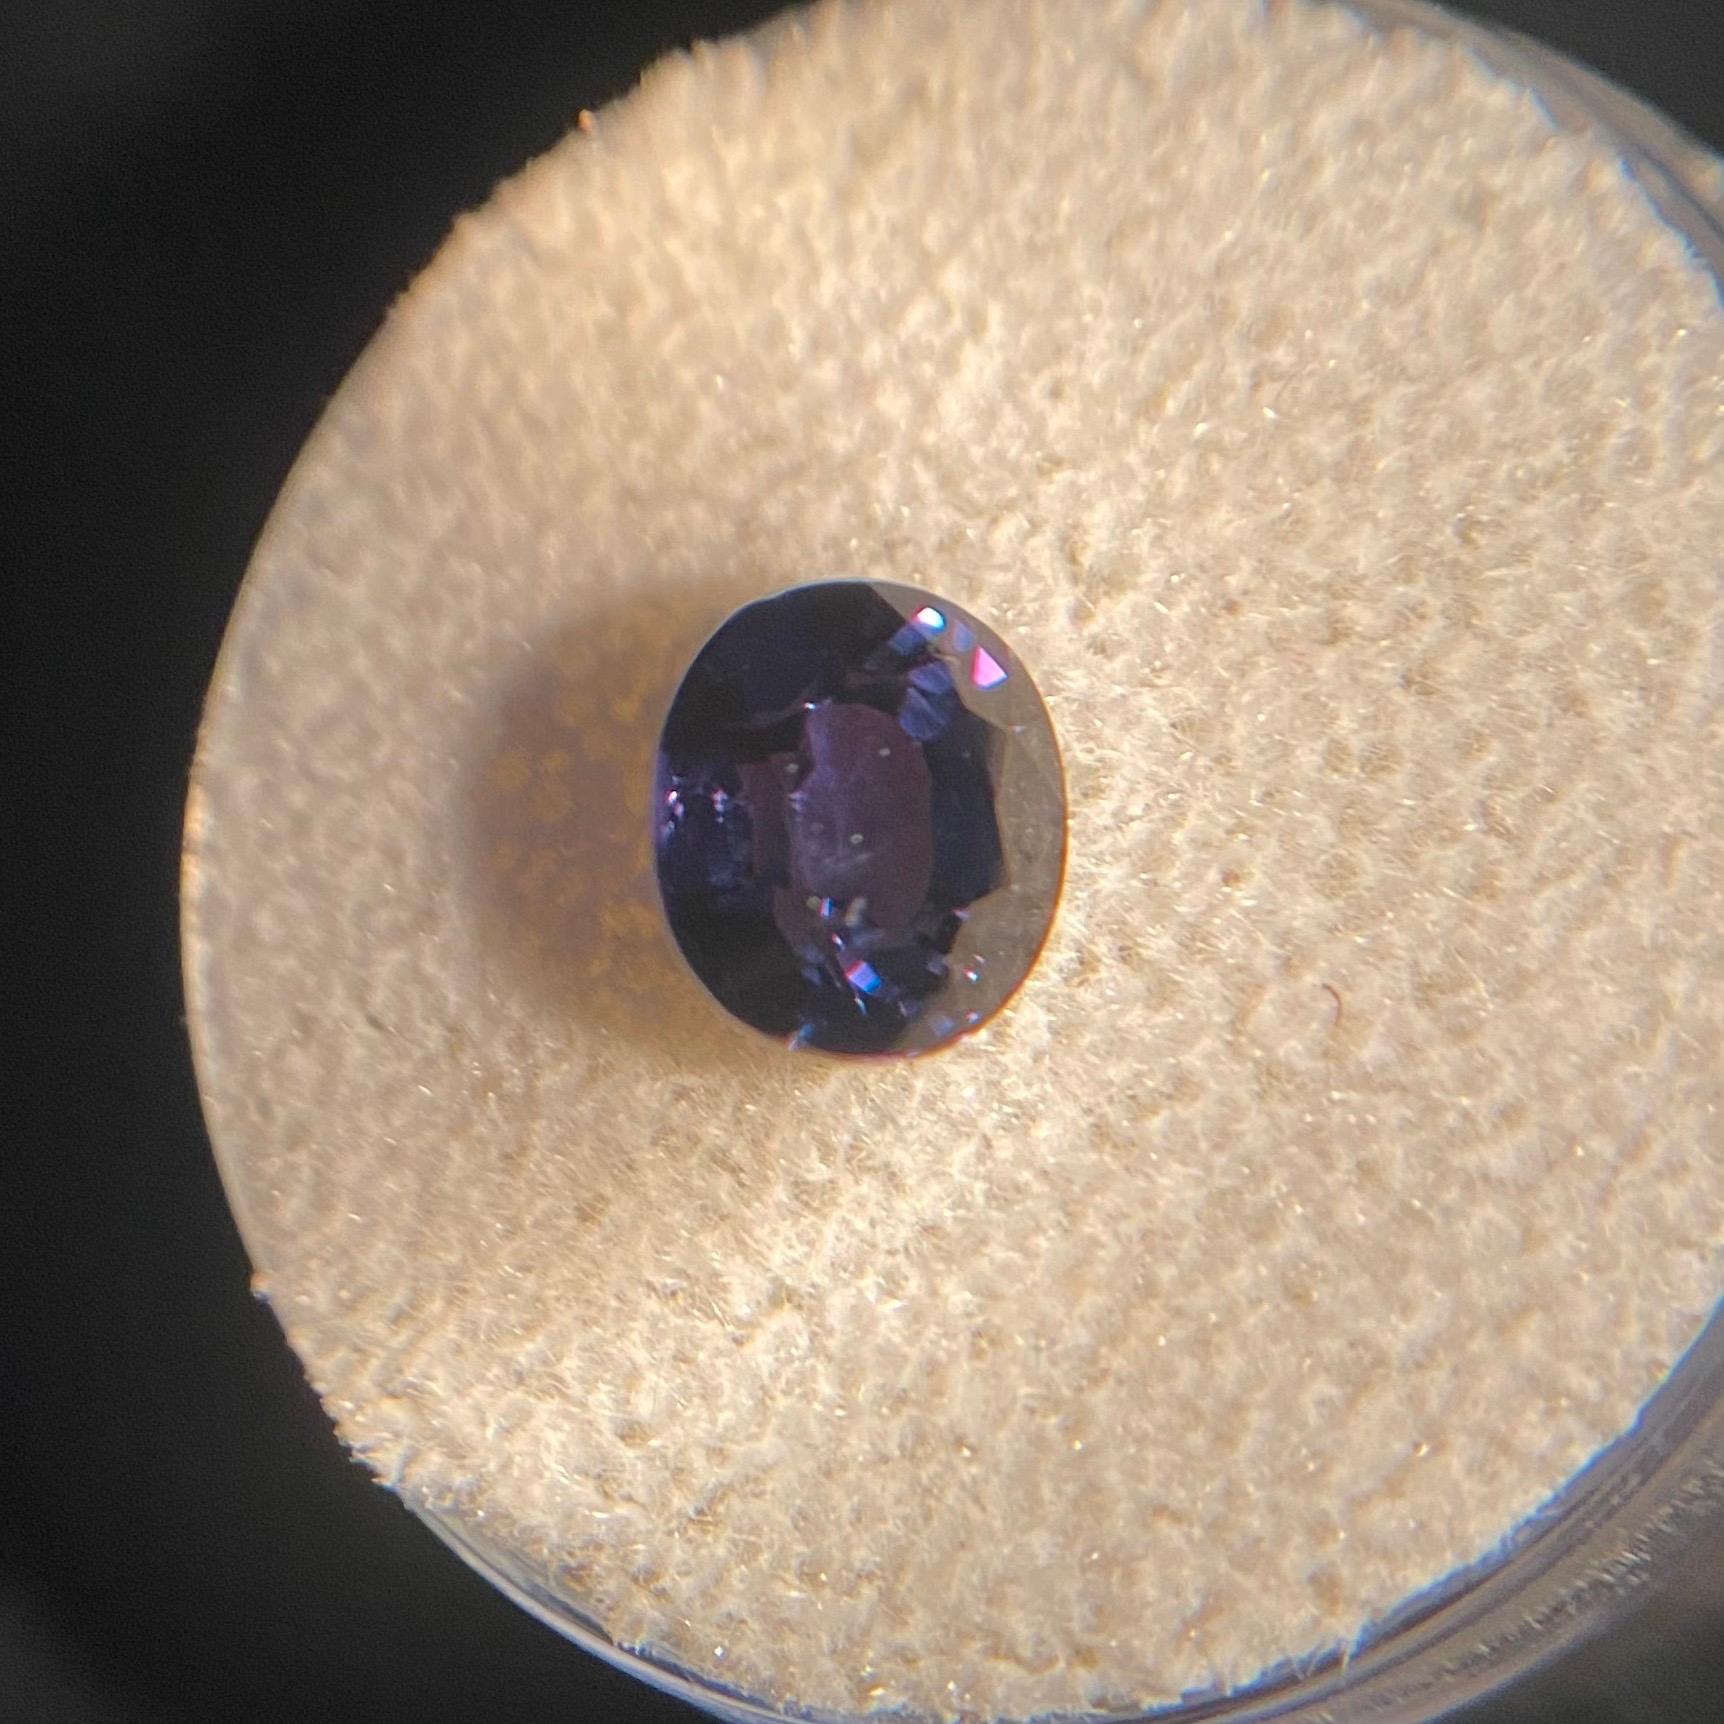 Rare Untreated Colour Change Sapphire Gemstone.

2.49 Carat unheated sapphire with a rare colour change effect. Changing colour depending on the light its viewed in. Very rare for natural gemstones, especially Sapphires. Changes colour from a